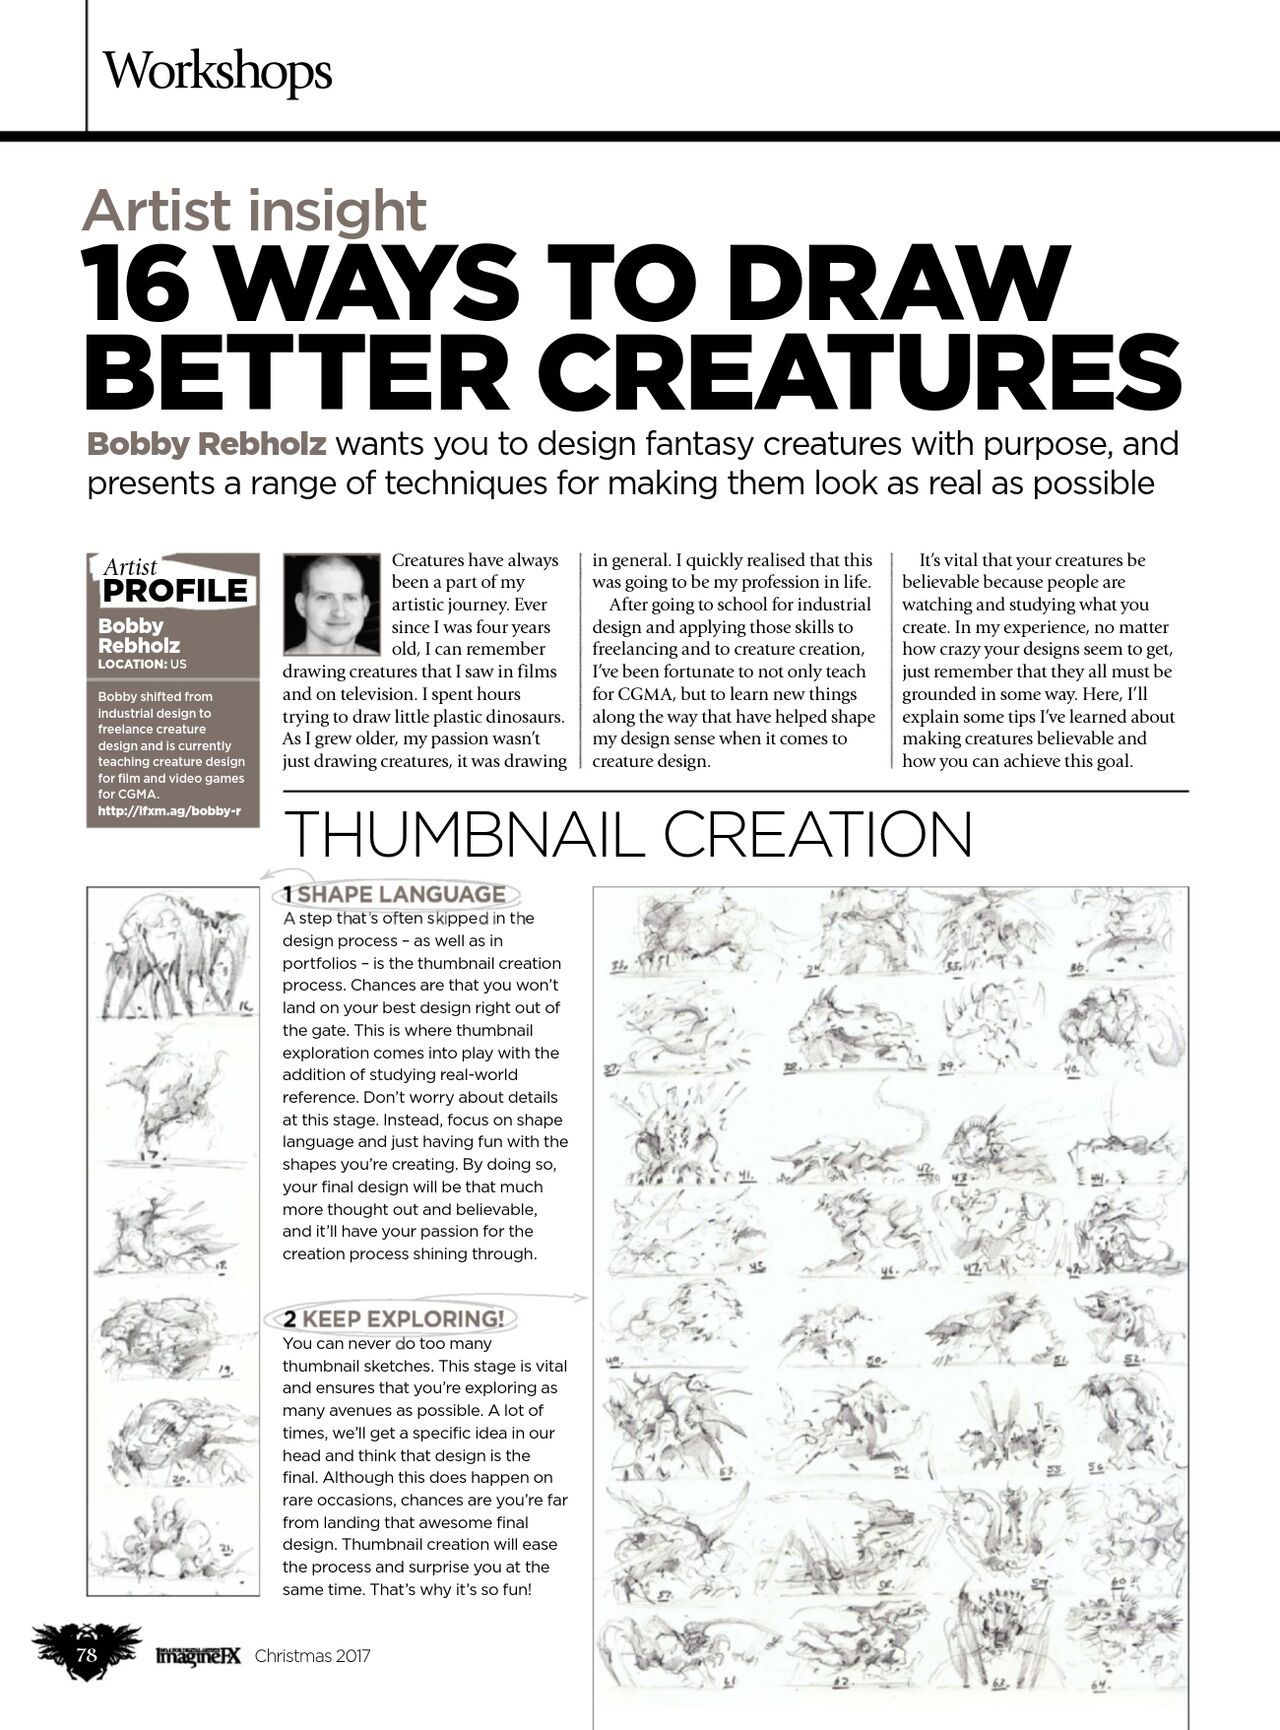 ImagineFX Christmas 2017 - Discover new drawing techniques [English] 72